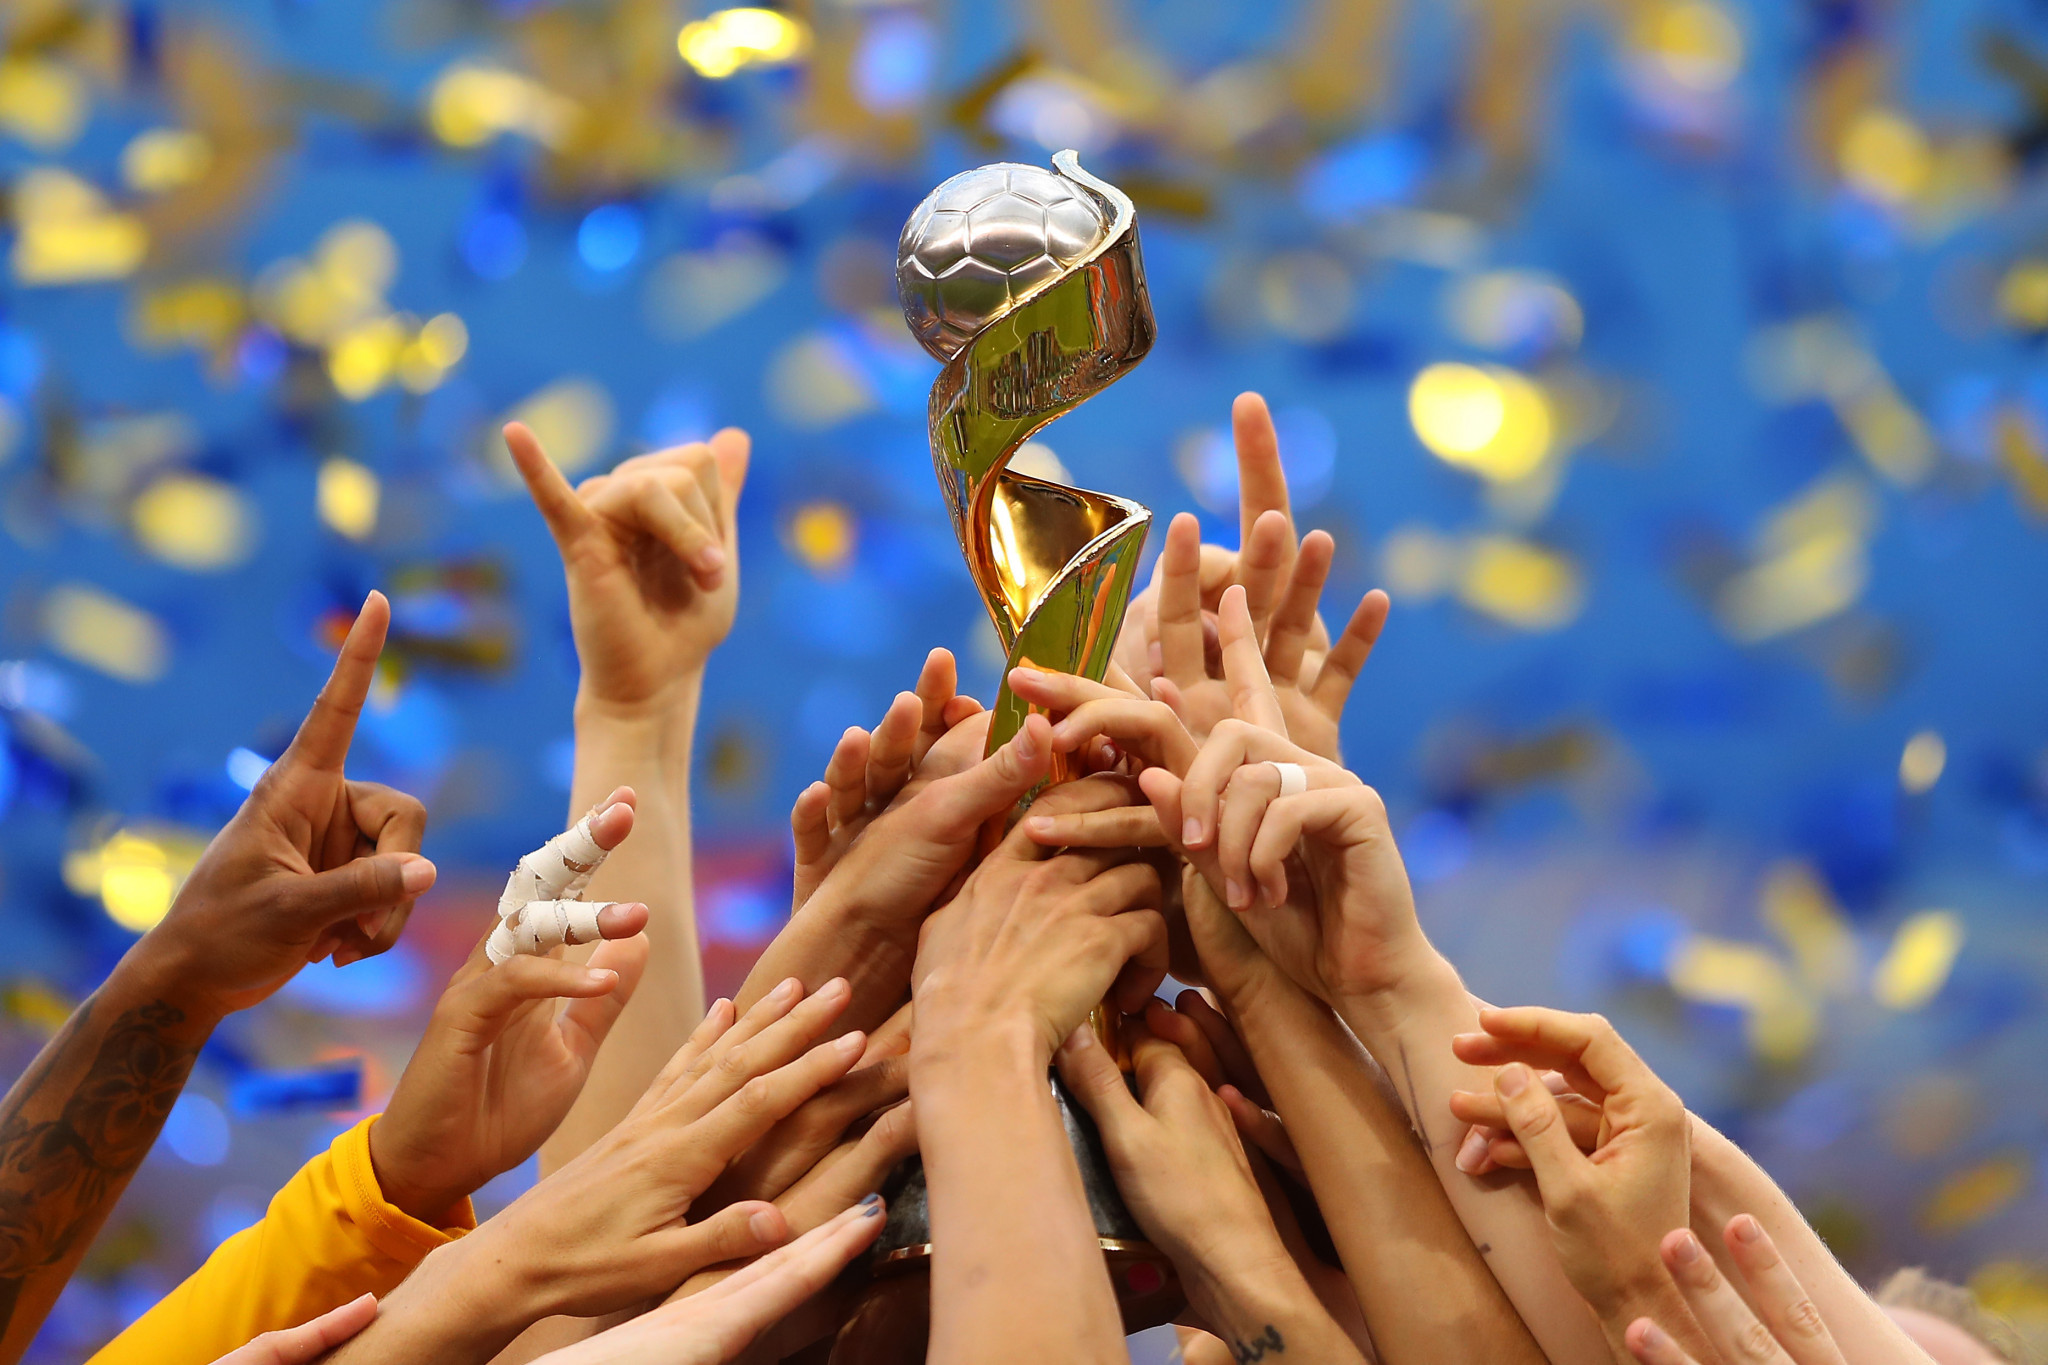 Interested countries are required to submit their interest in the 2027 FIFA Women's World Cup by April 21 ©Getty Images